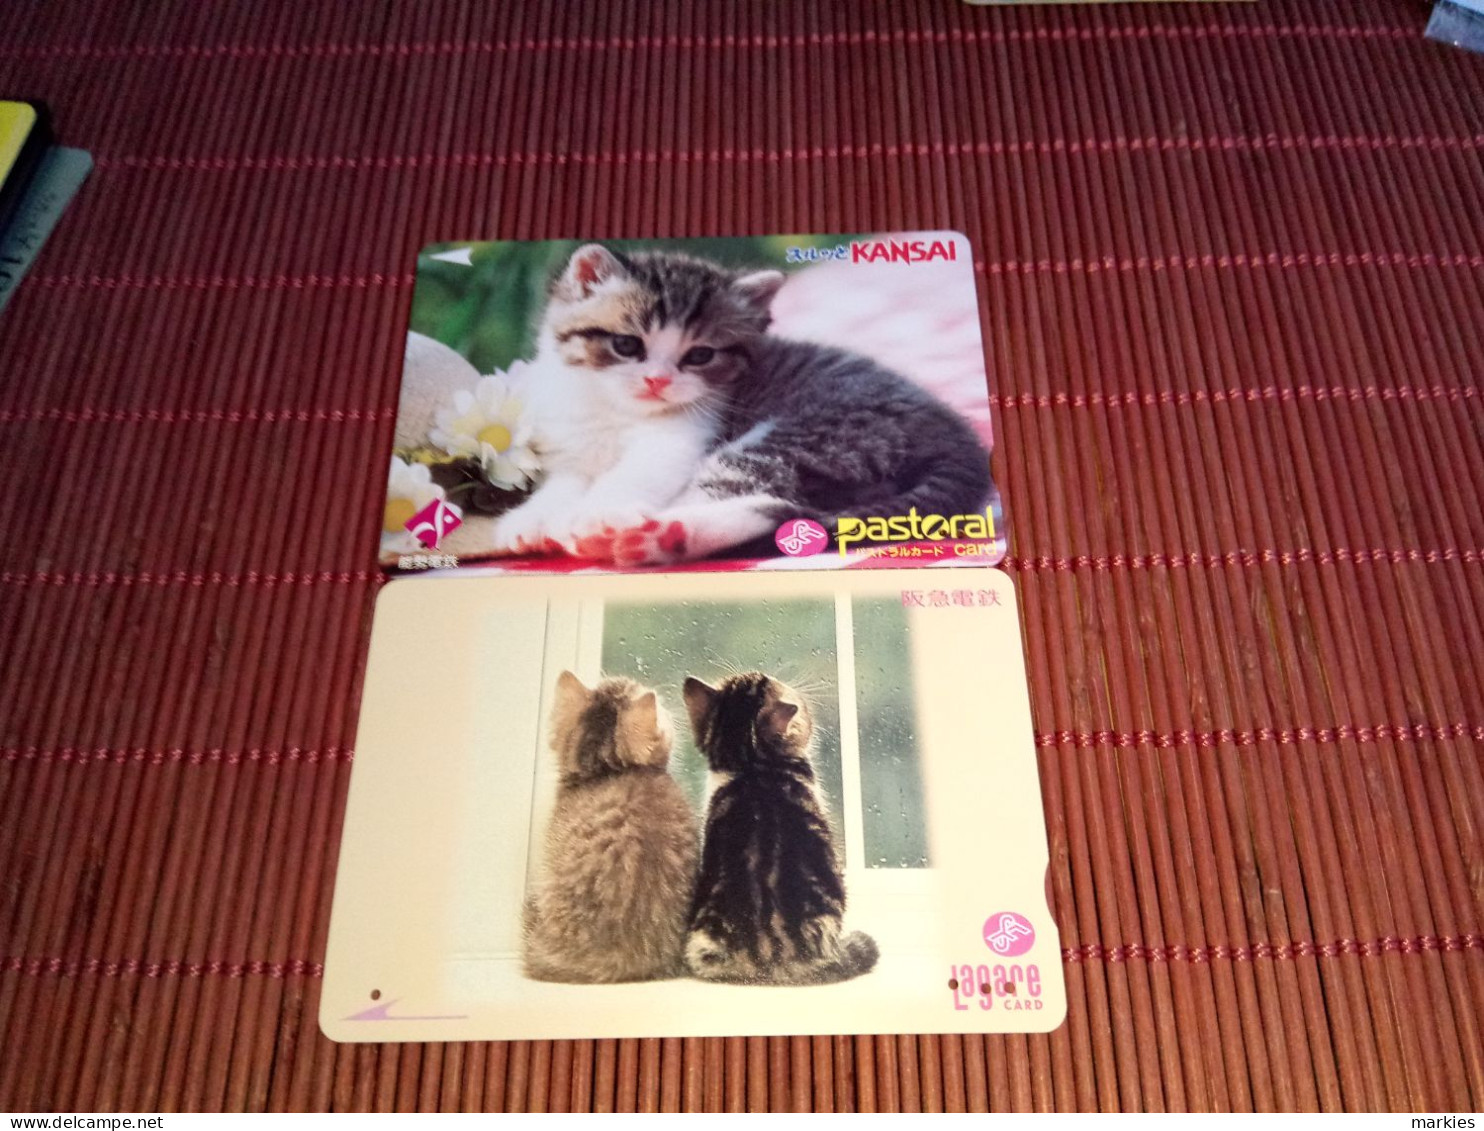 Cats 2 Nice Metrocards Used Rare - Cats